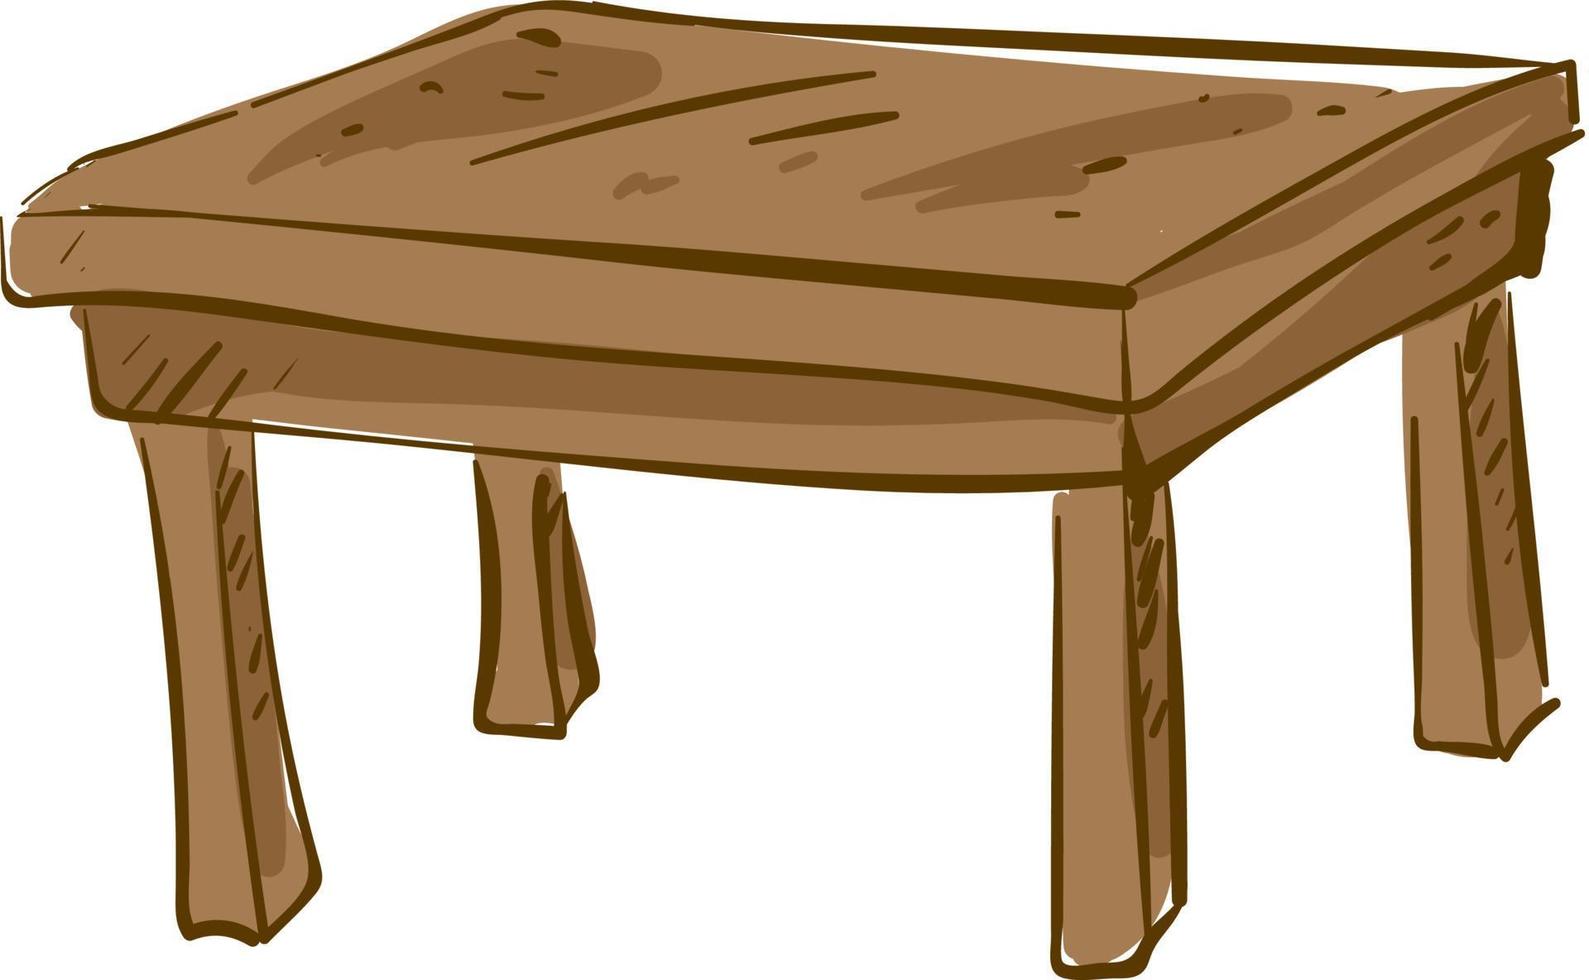 Wooden table, illustration, vector on white background